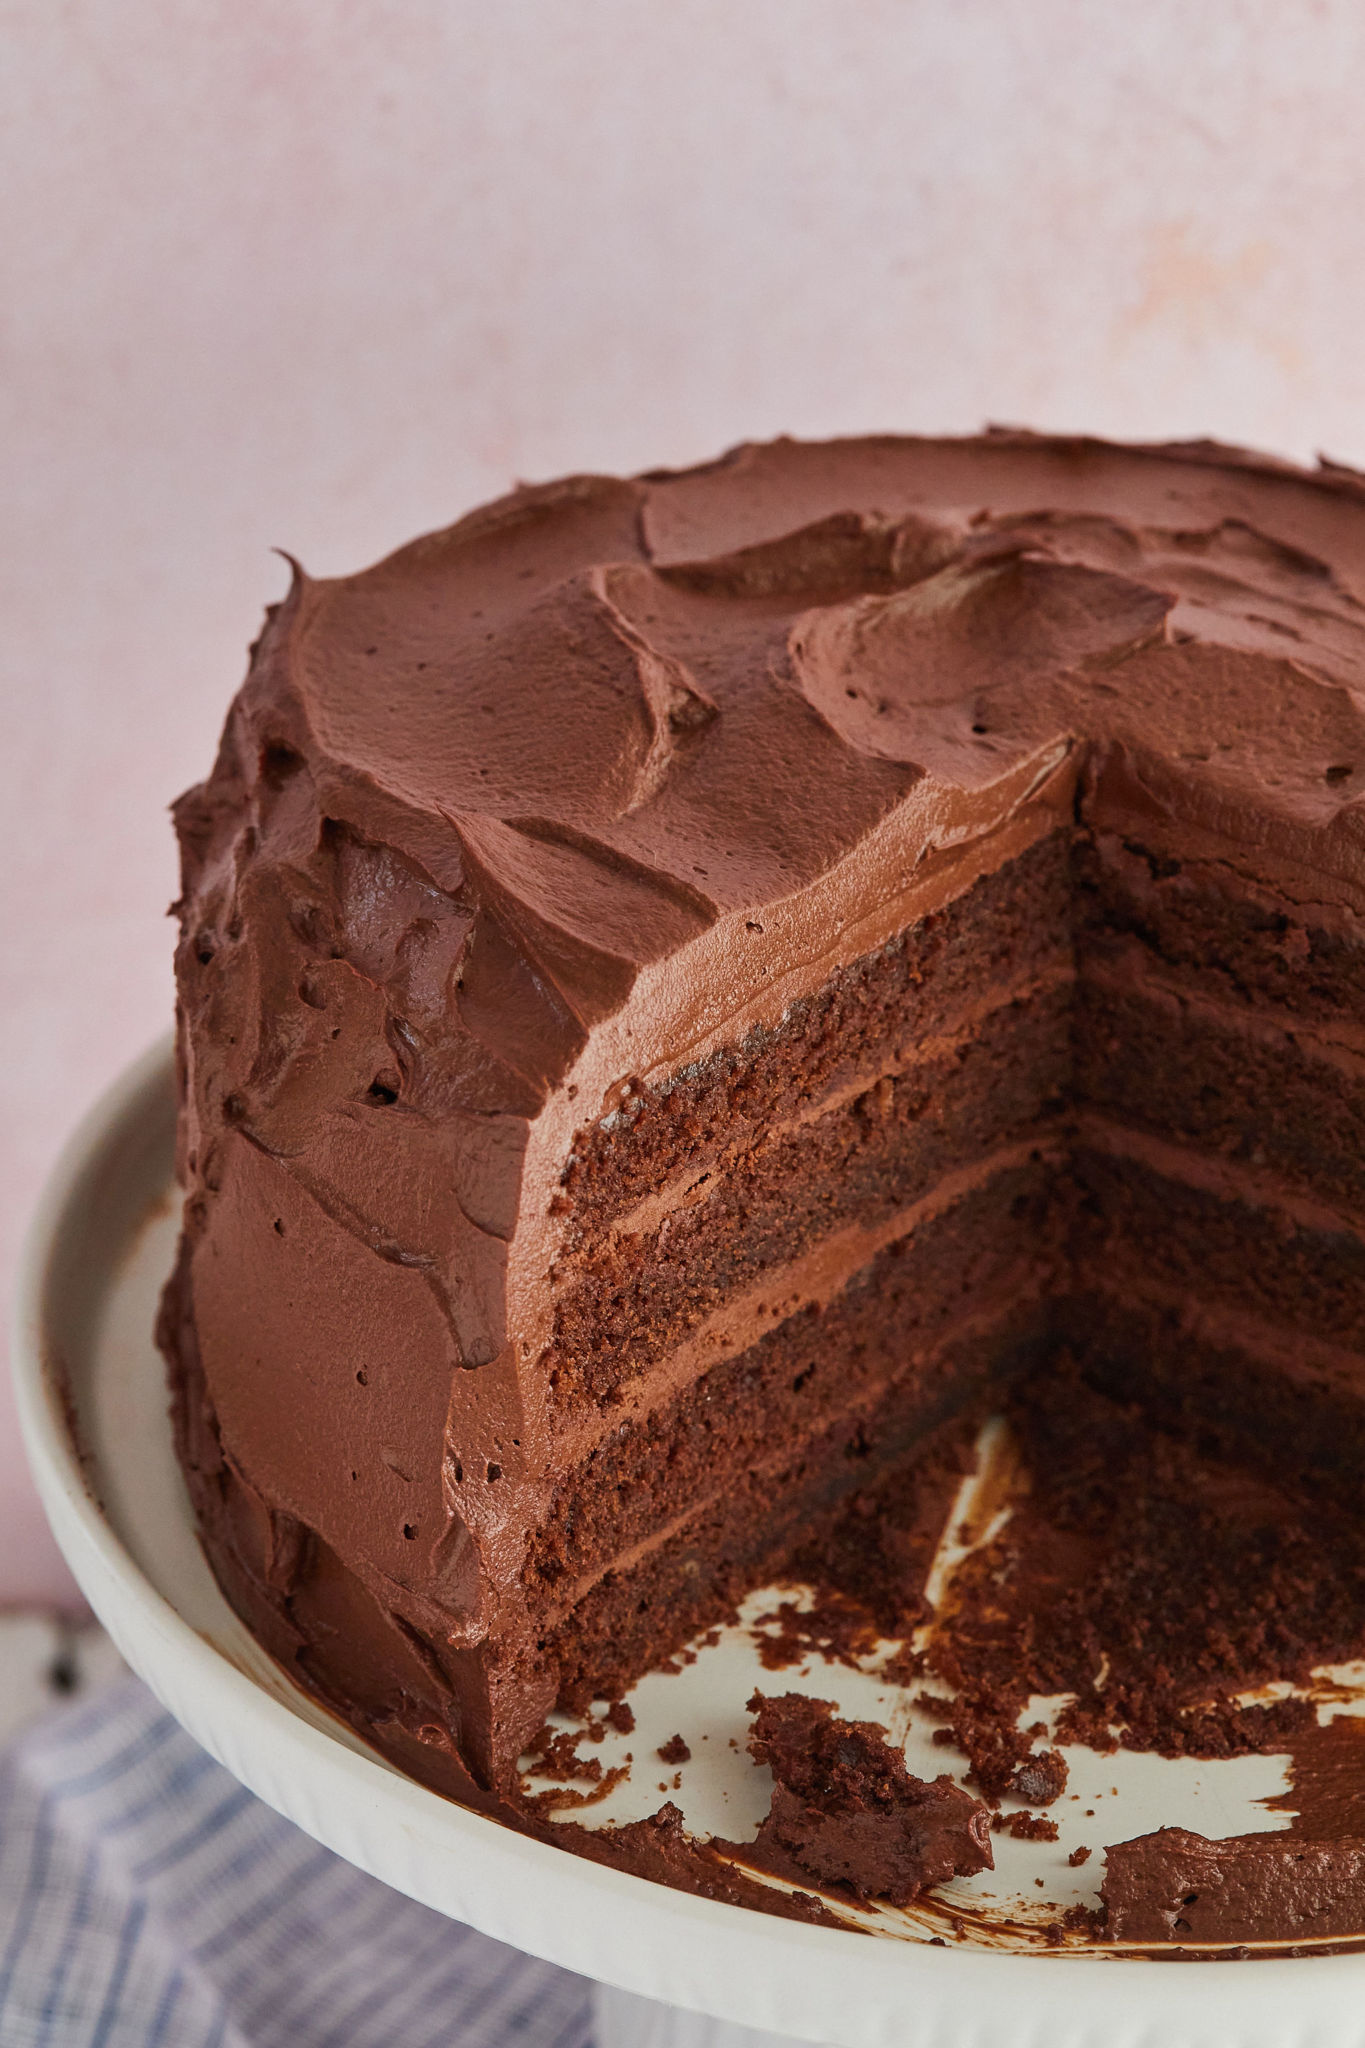 A close up of the layers and whipped ganache of my best chocolate cake recipe.